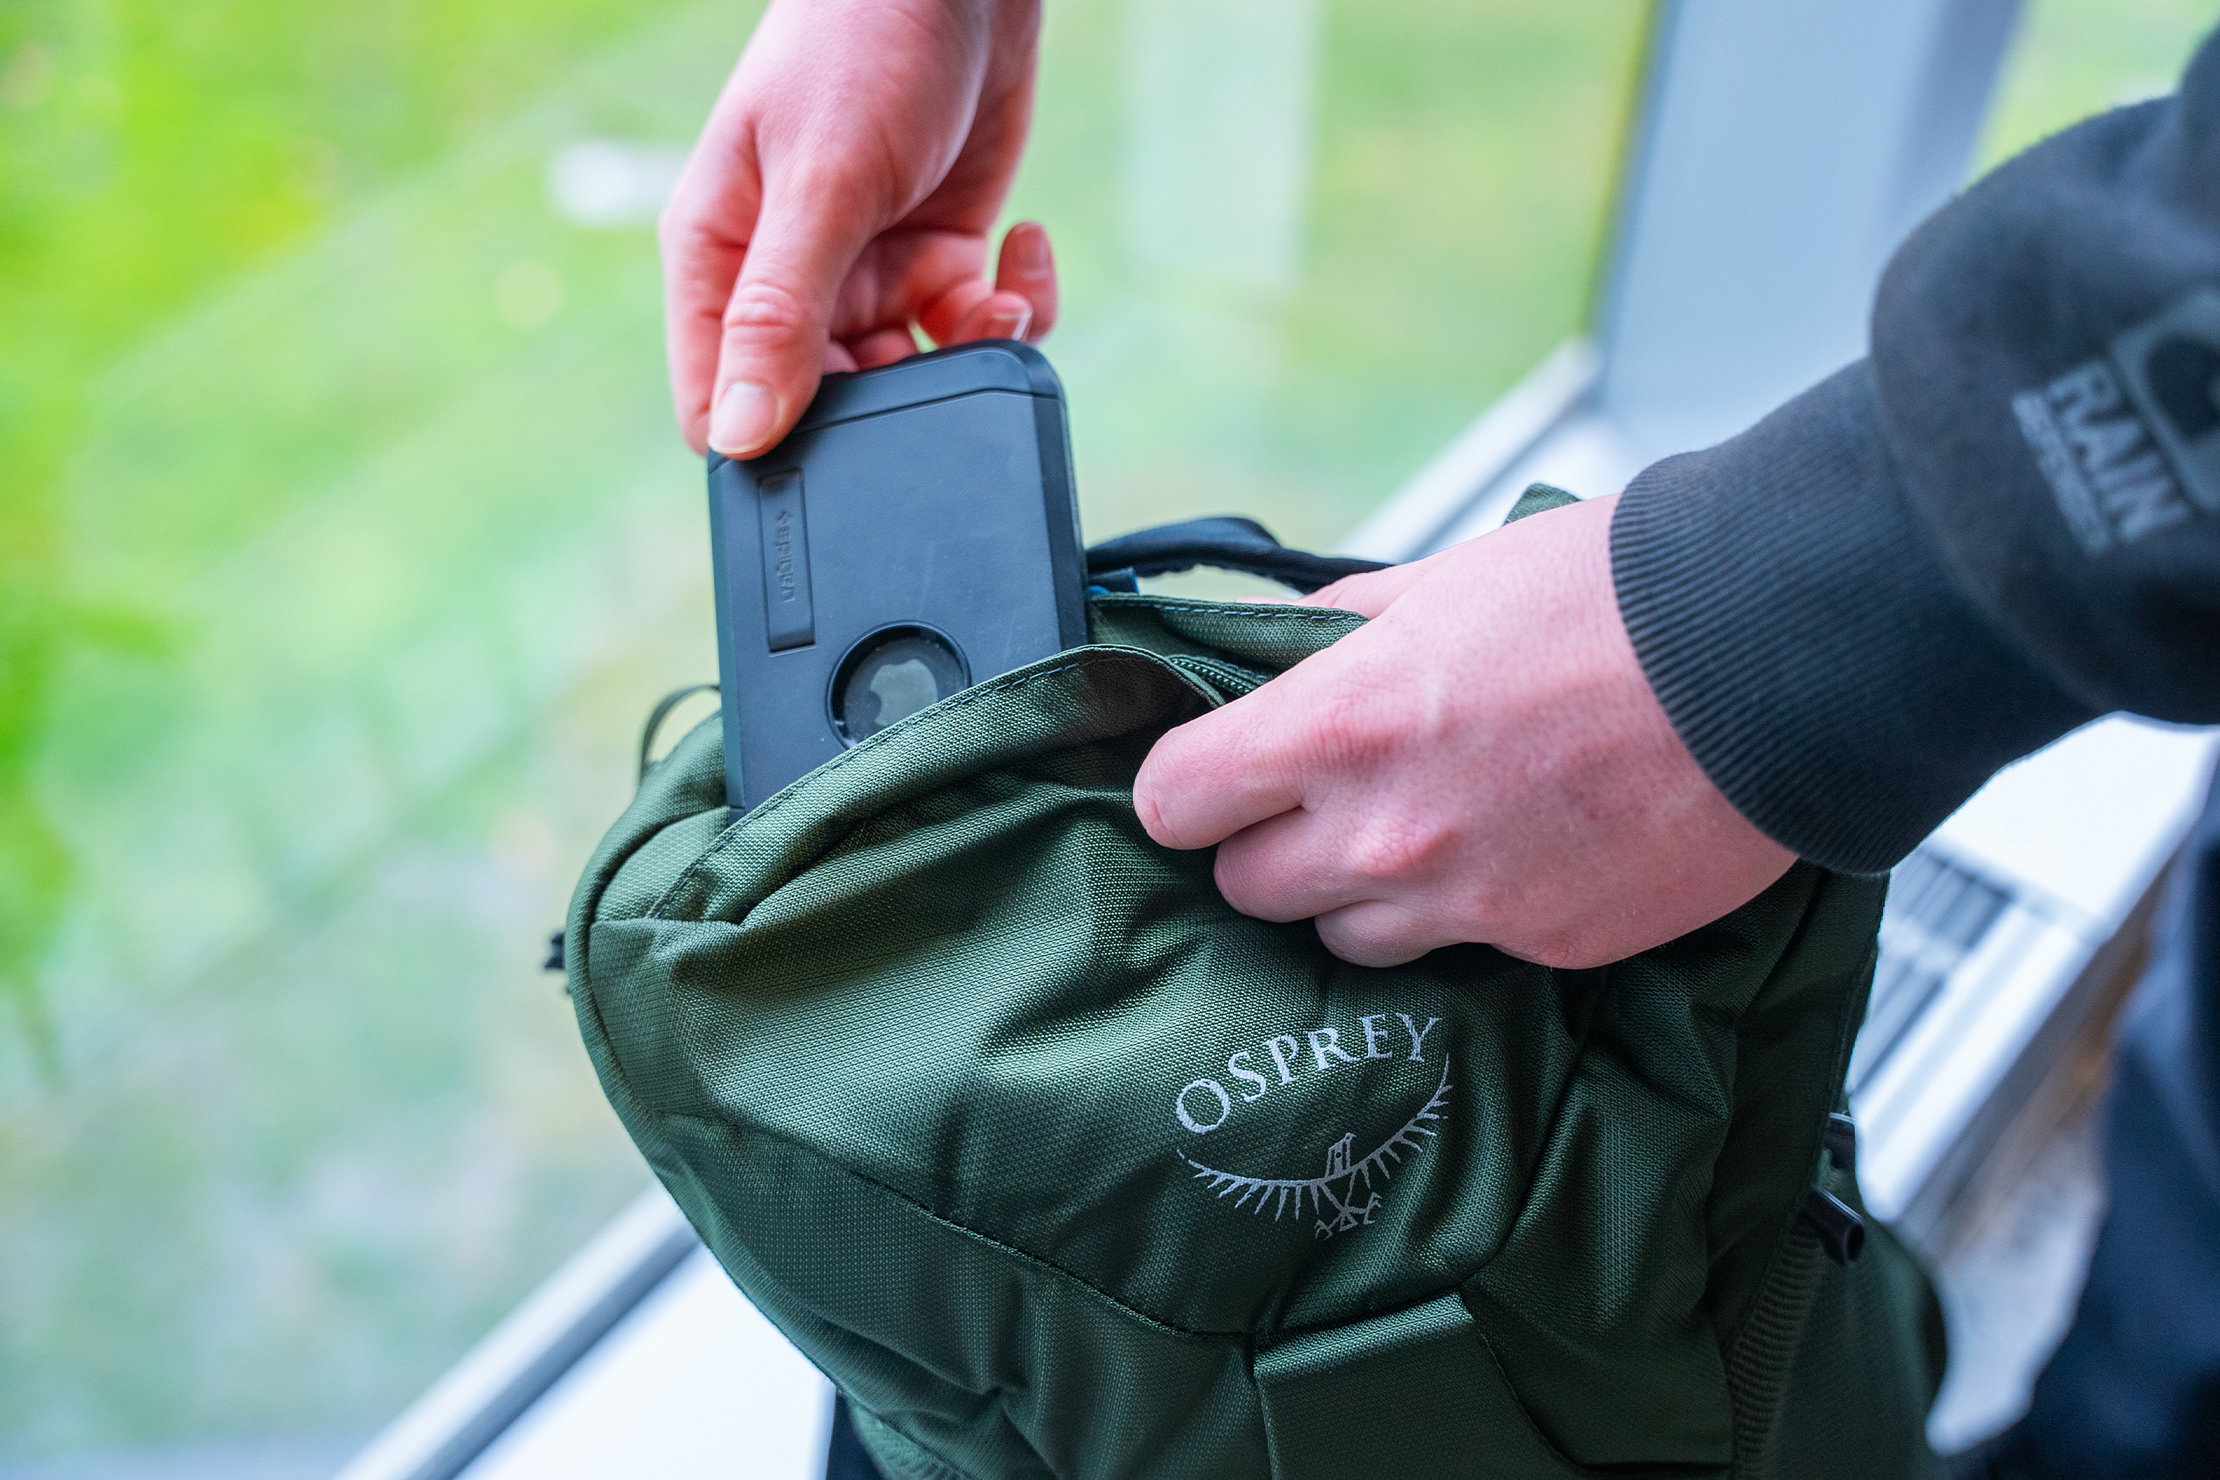 Osprey Farpoint:Fairview Travel Daypack In Use